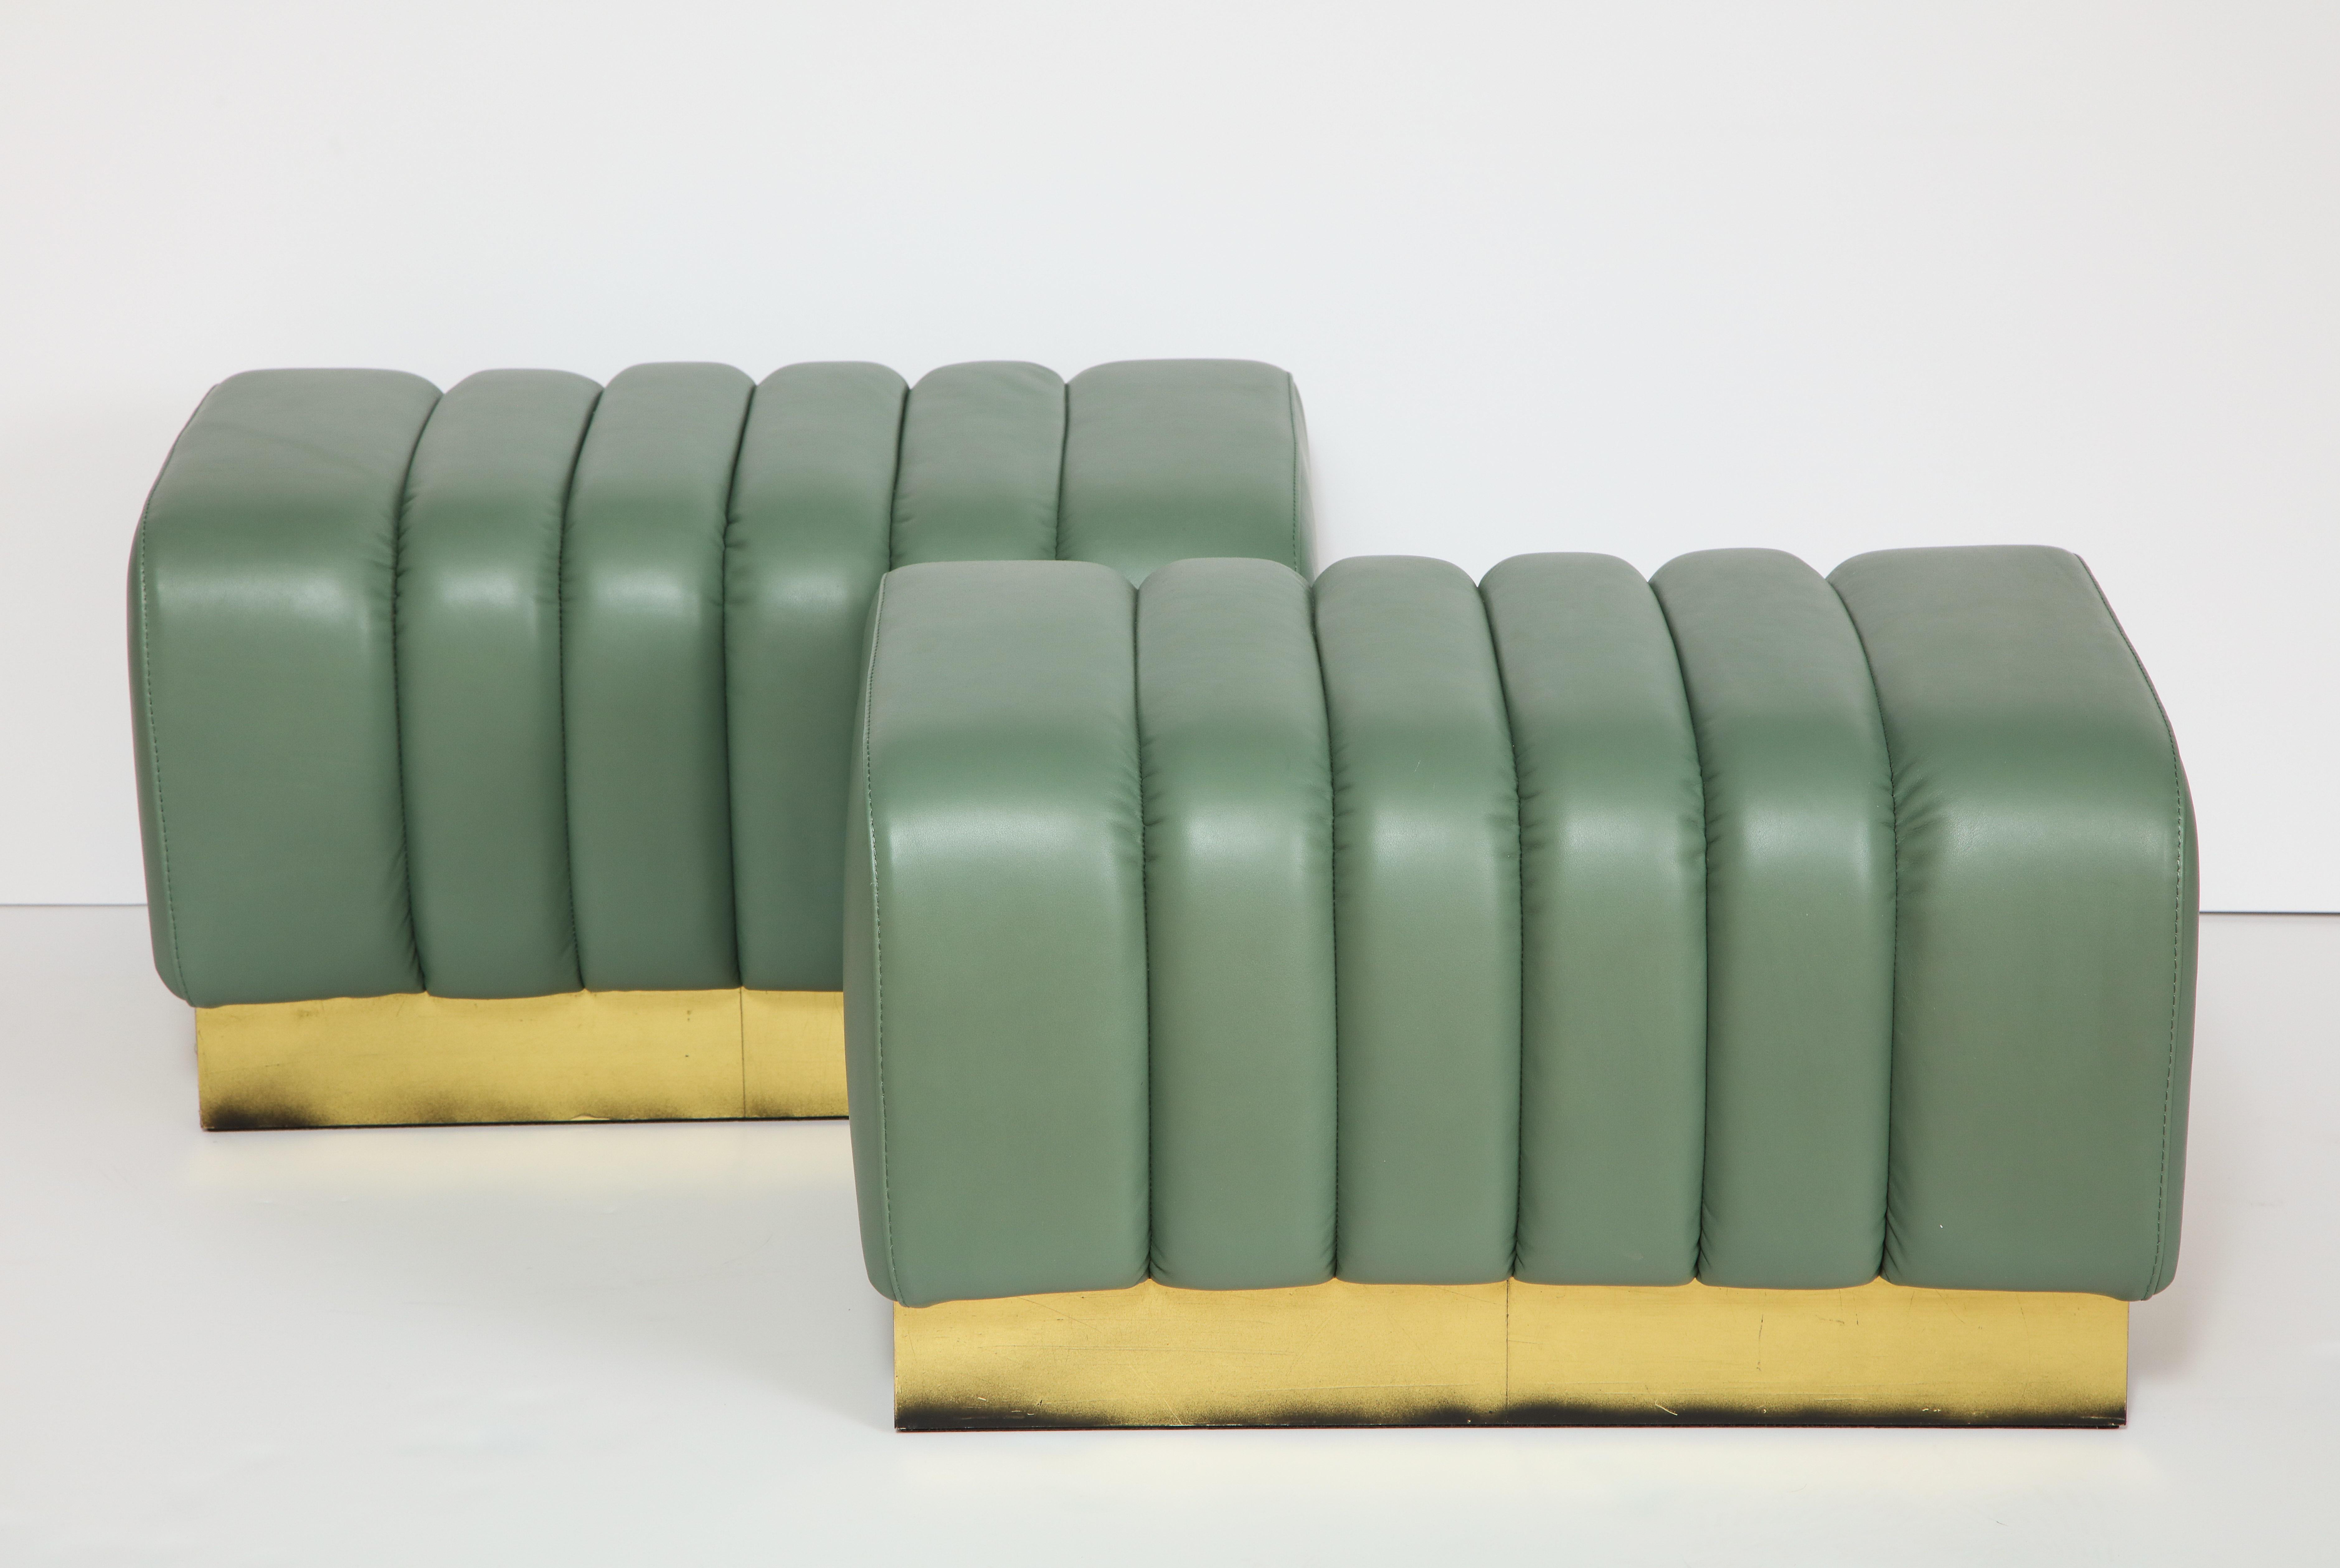 Contemporary Pair of Italian Leather and Brass Stools or Benches, Italy